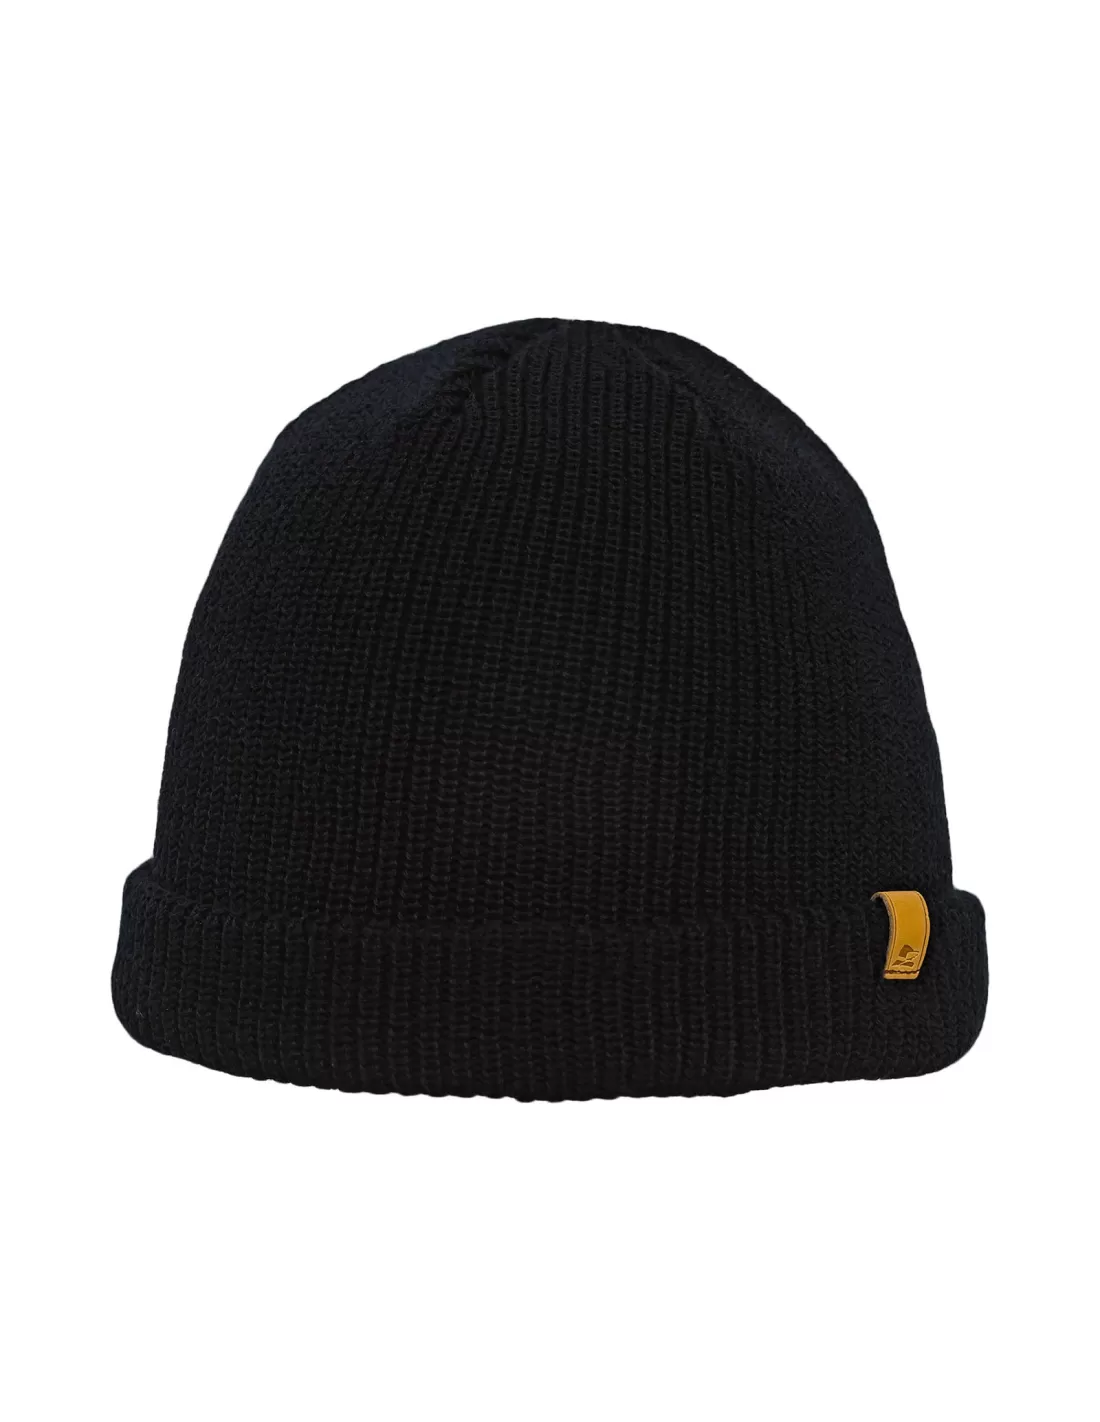 Salty Dog knitted winter beanie made of extra fine merino 100% wool.